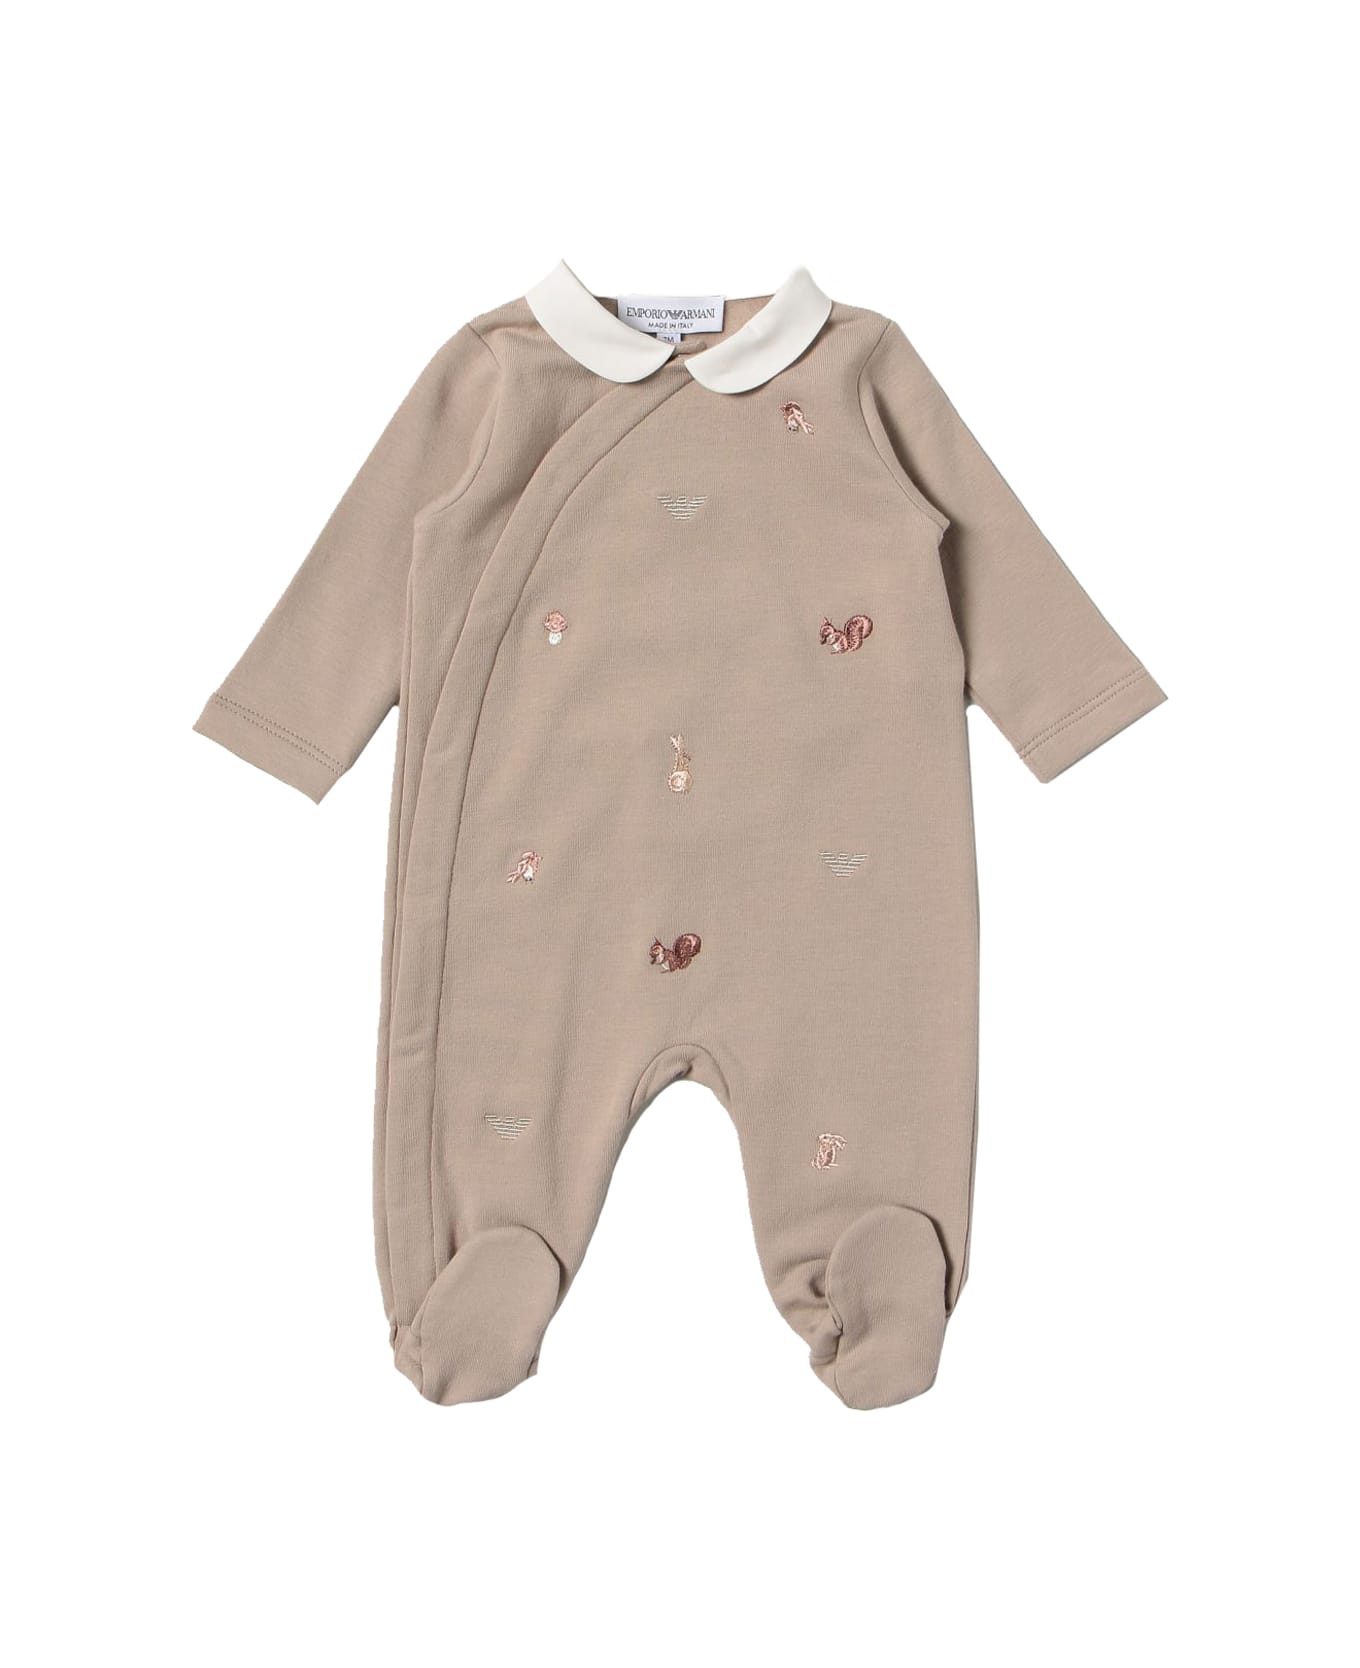 Emporio Armani Jumpsuit With Fairy Embroidery - Beige